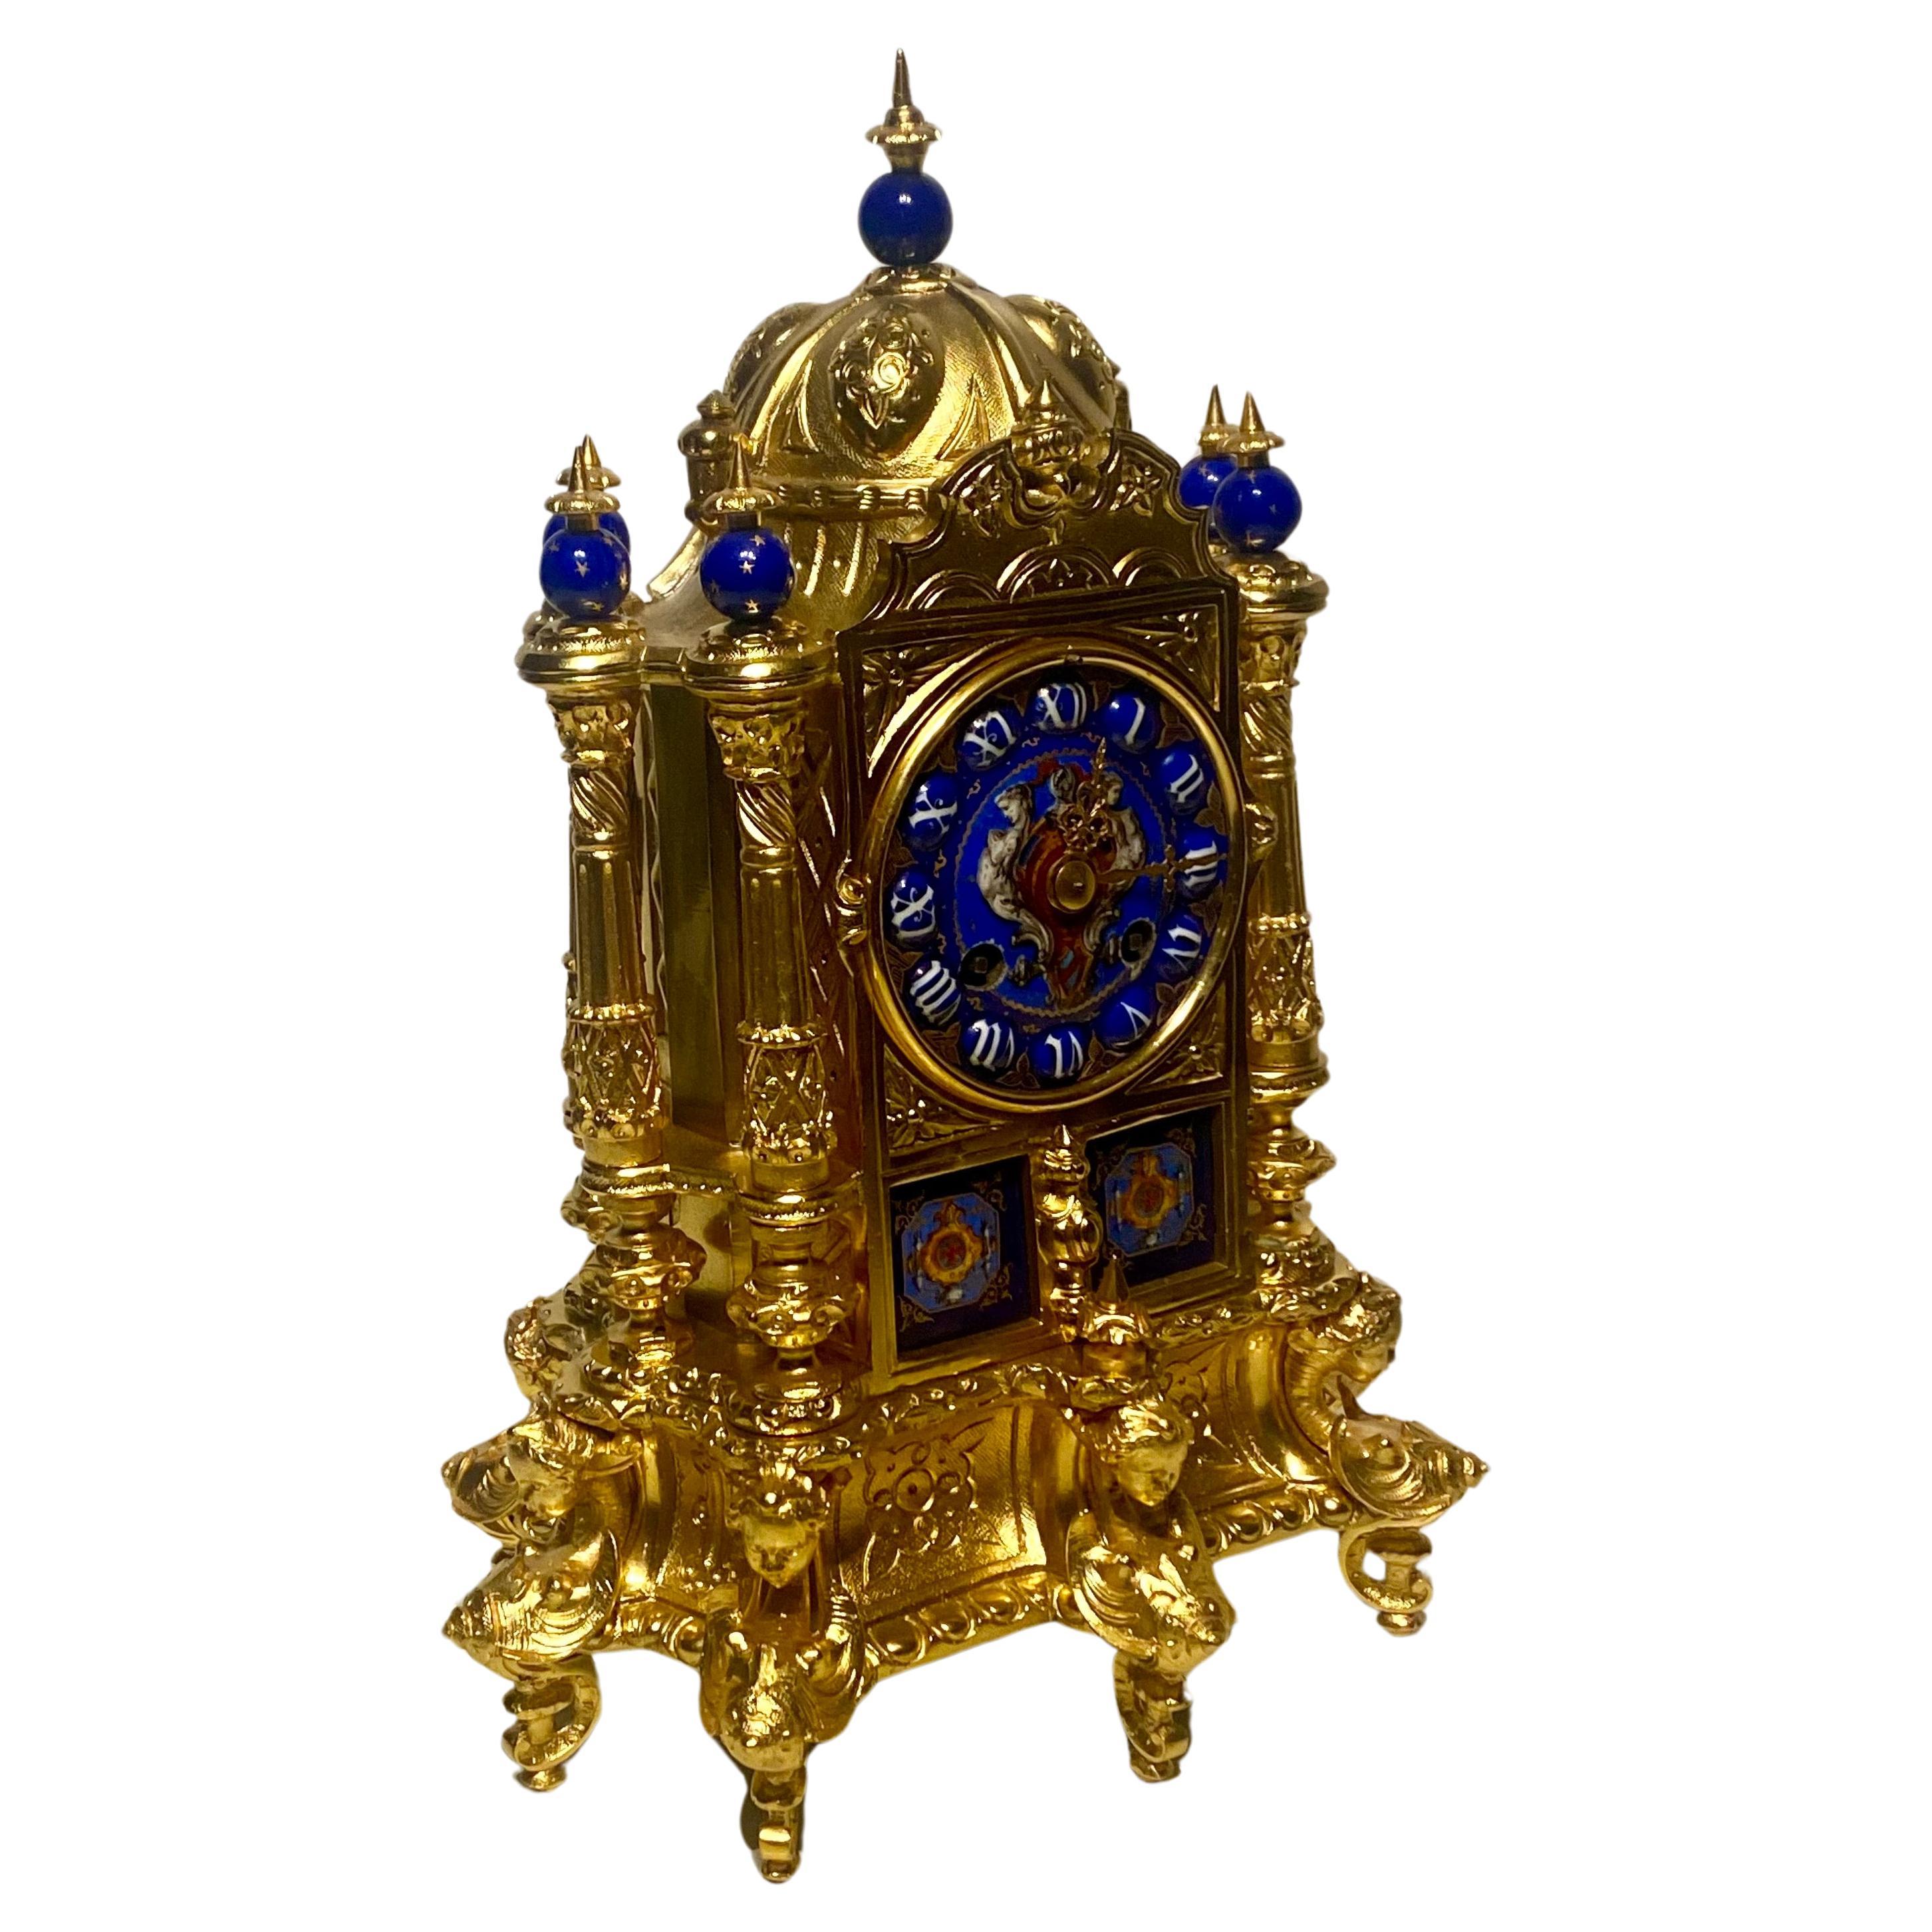 Renaissance style gilt bronze and enamel mantel clock
French, late 19th century
This exquisite mantel clock is crafted in the idiosyncratic Renaissance Revival style that found its fullest expression in the latter 19th century. The clock is superb